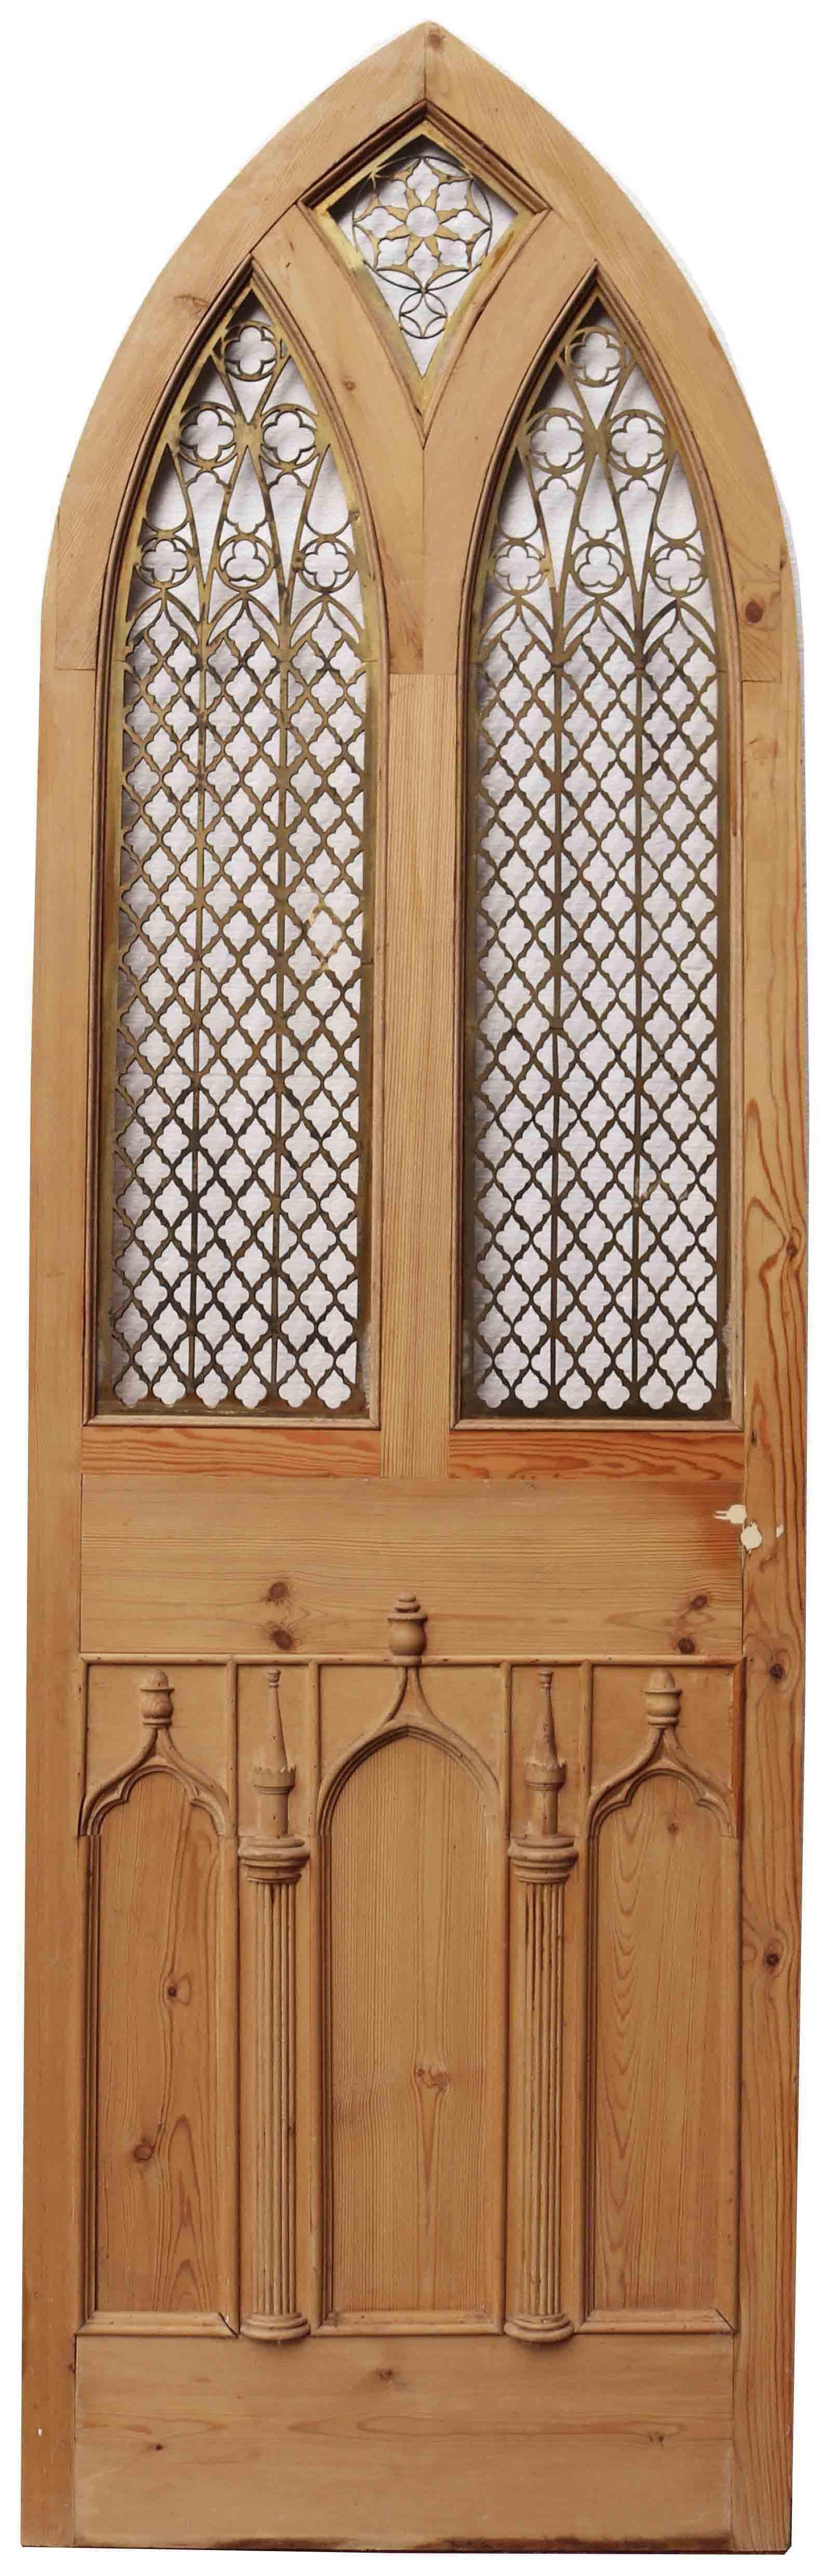 About:

This unusual arched pine door features decorative pierced brass grills and decorative molding to the lower half.

We have two of these doors available.

Condition report:

There is no glazing present. There has been a small repair to